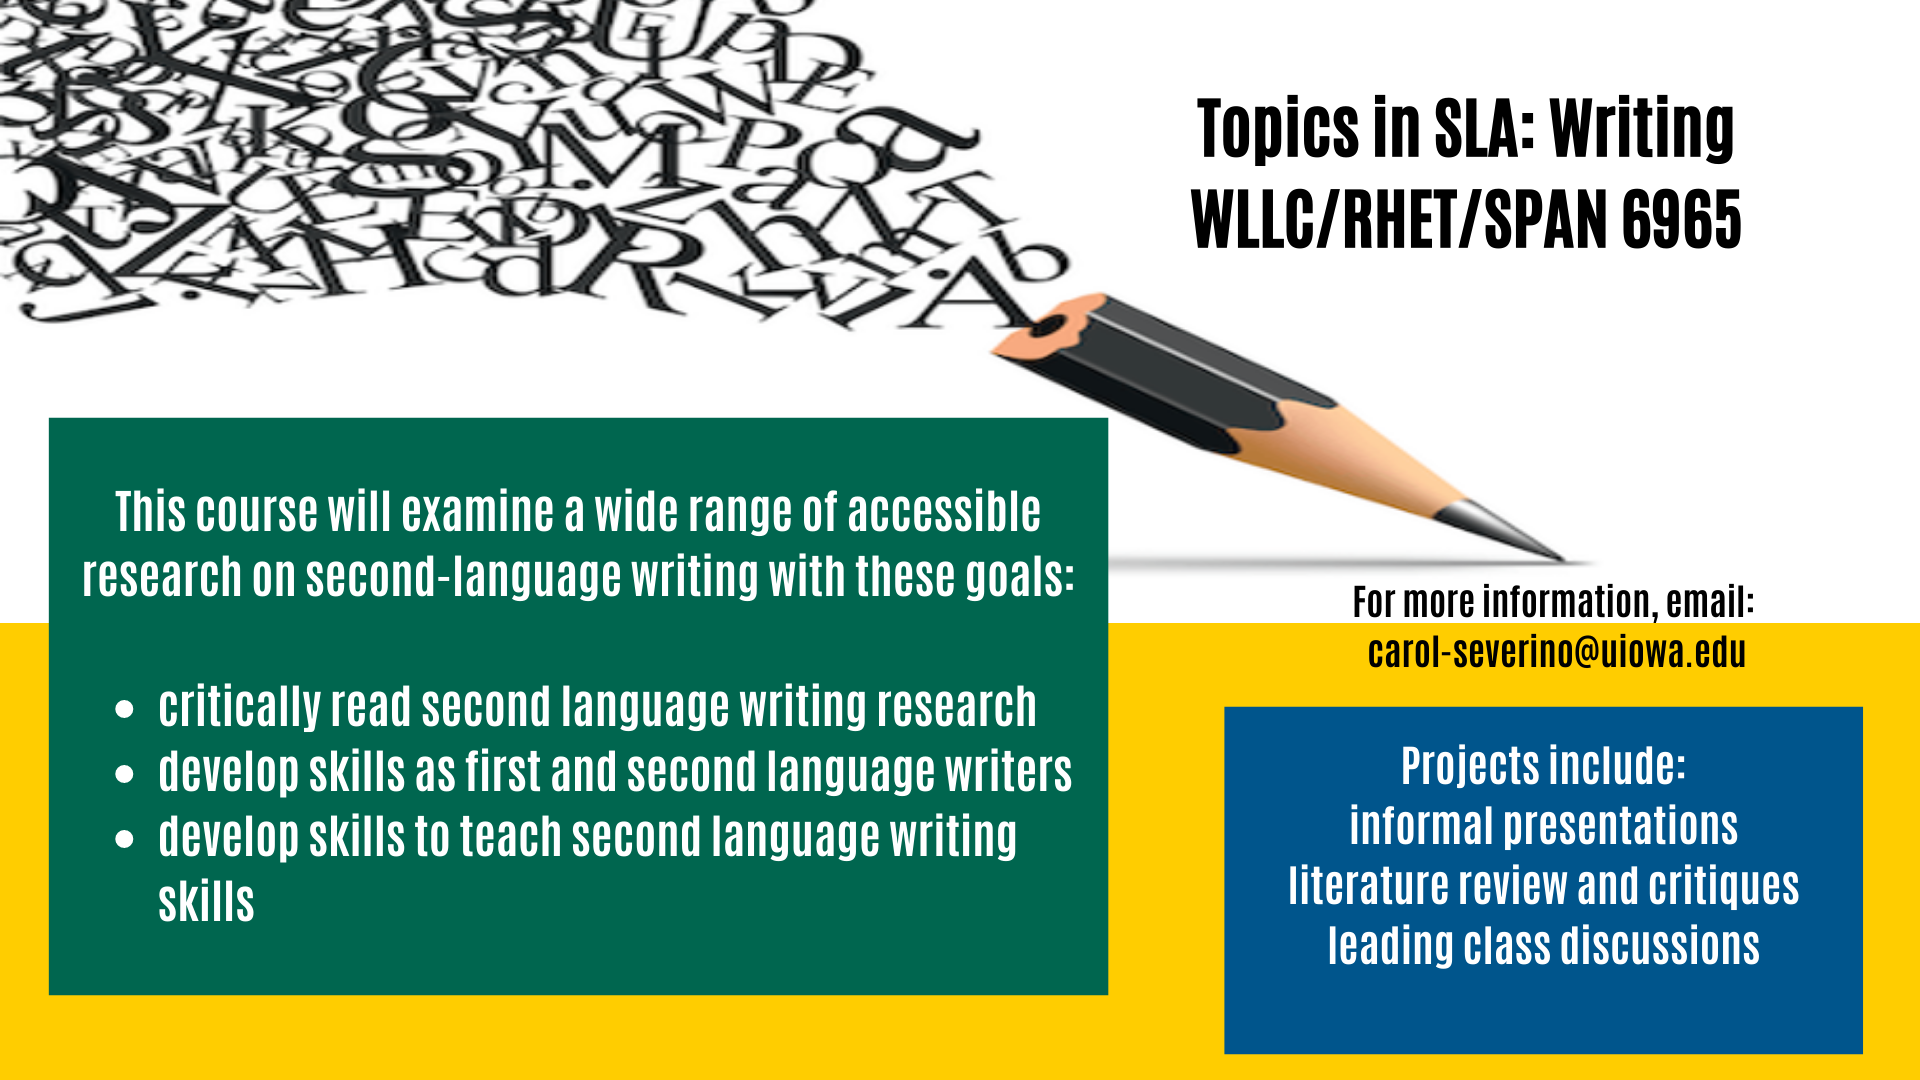 Topics in SLA: Writing; This course will examine a wide range of accessible research on second-language writing with a focus on second-language research and skills for second-language writing and teaching writing; contact carol-severino@uiowa.edu